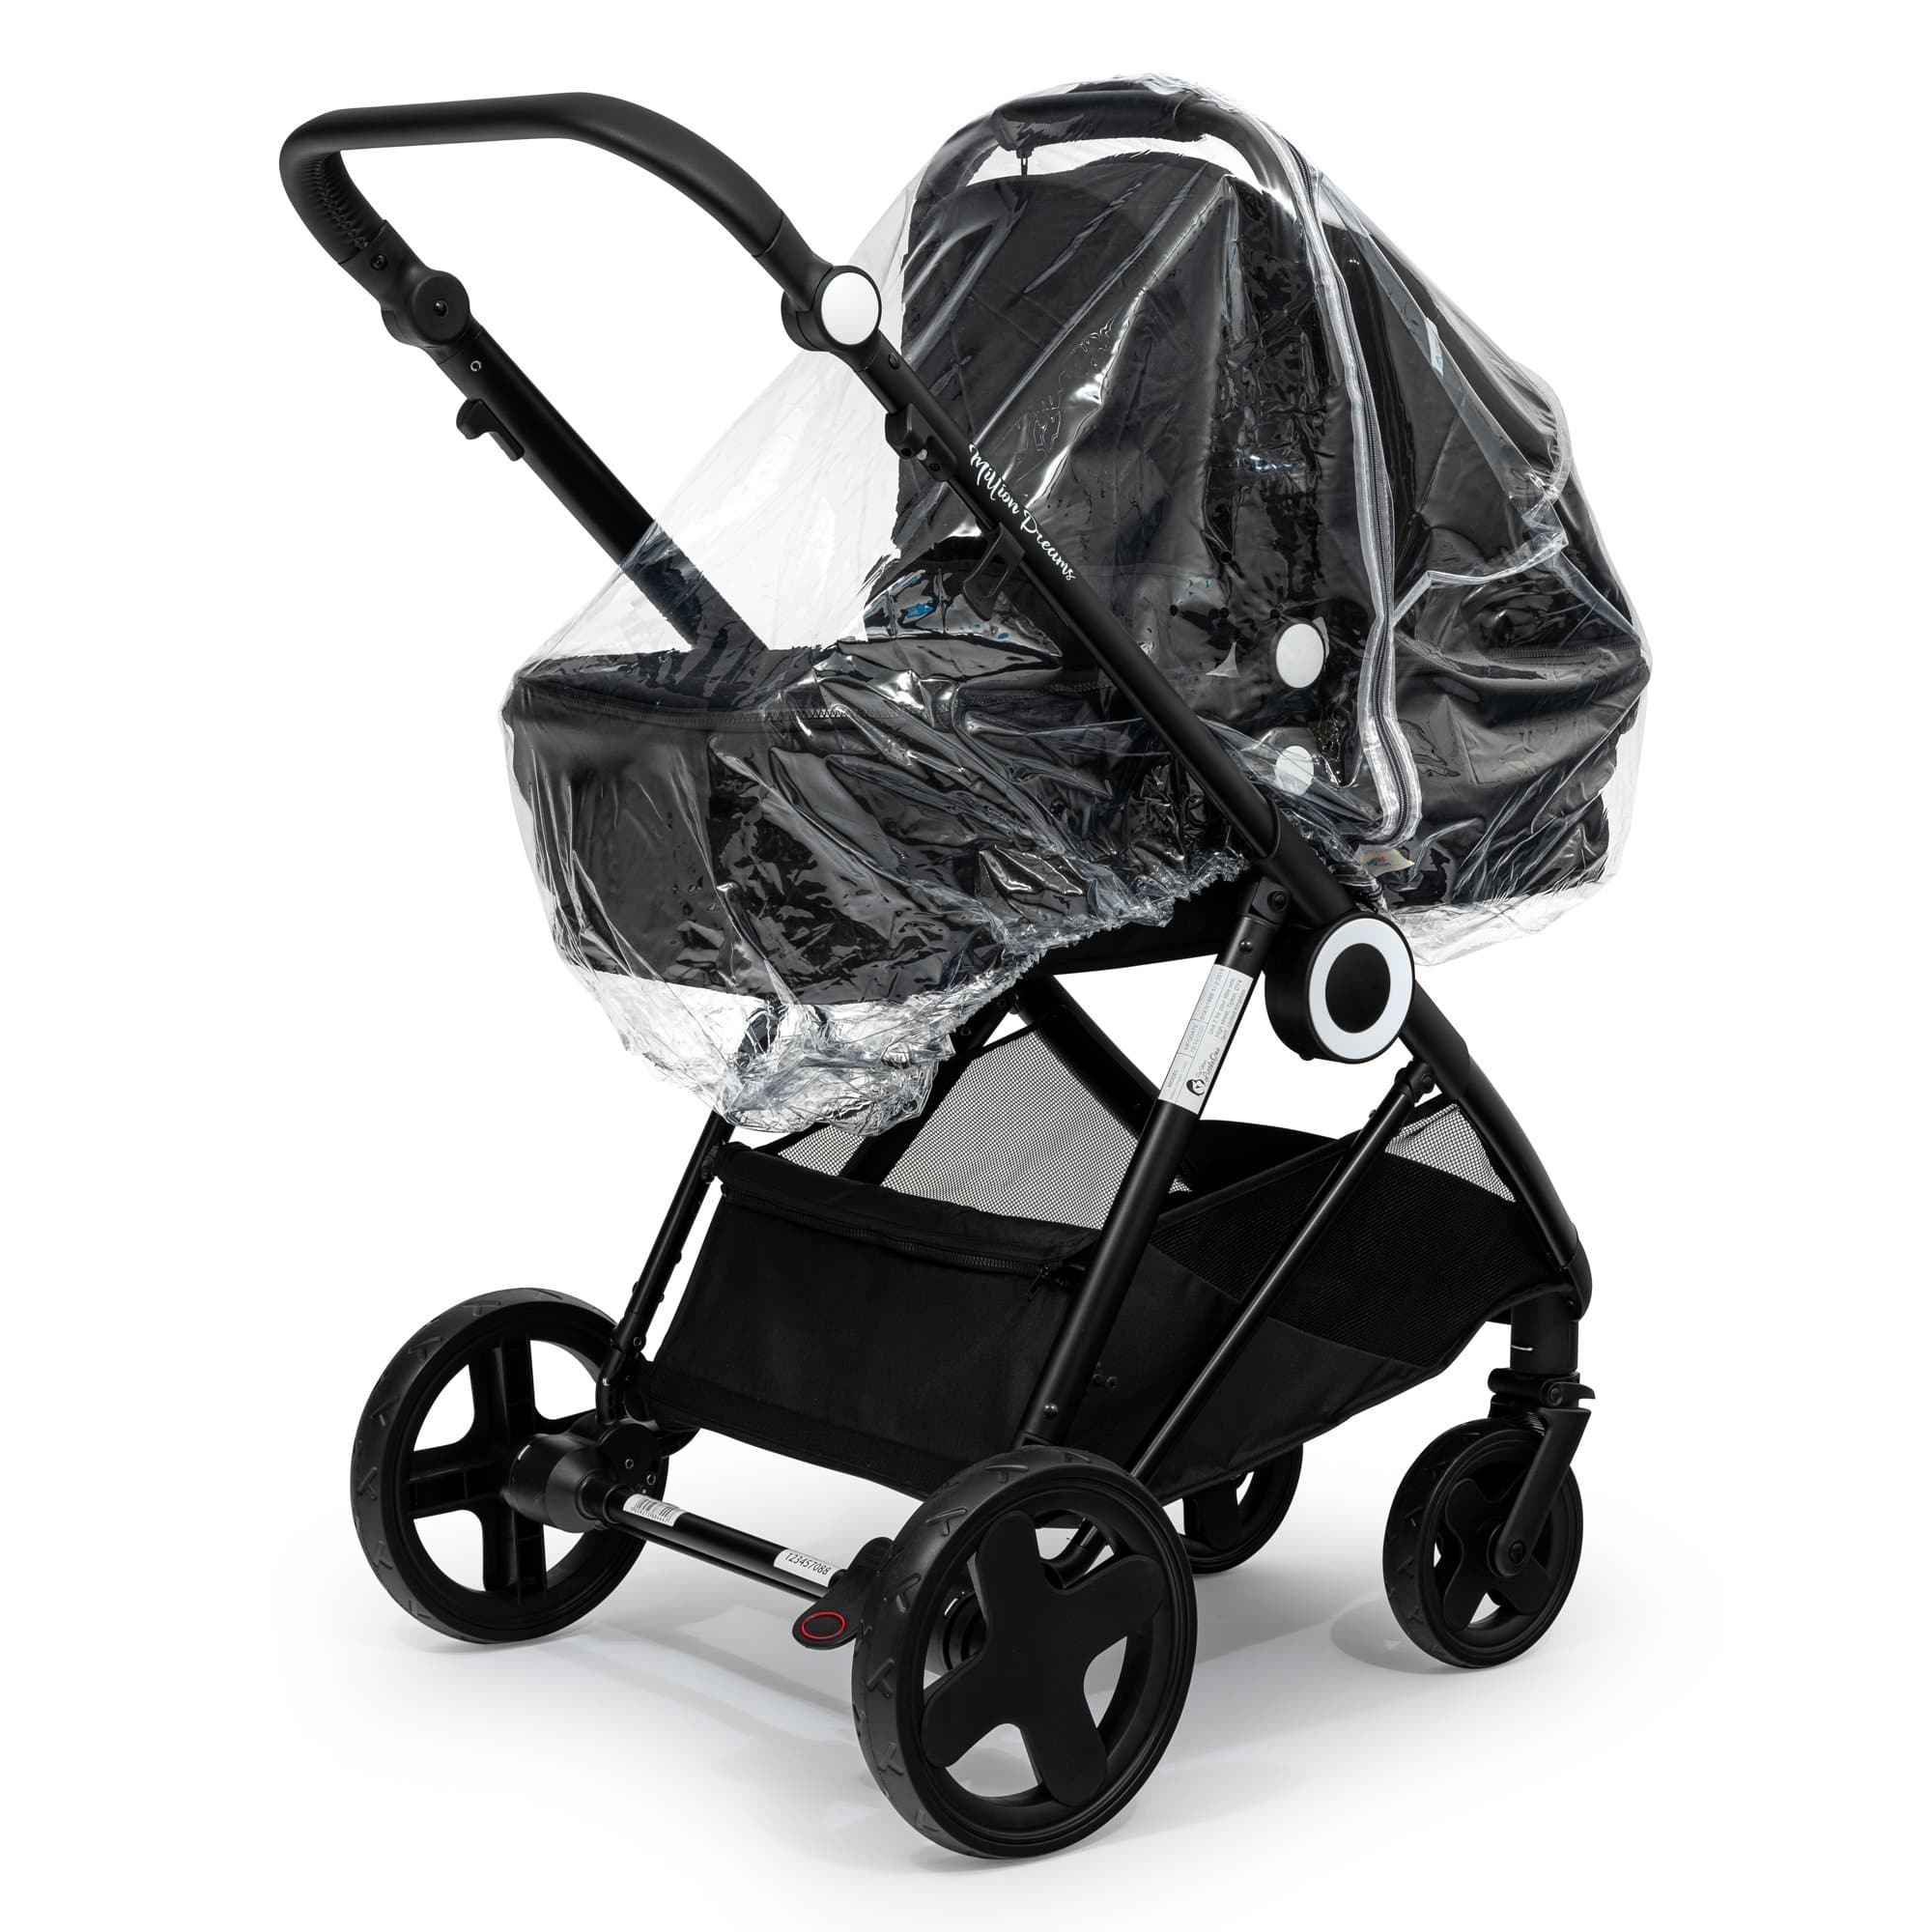 2 in 1 Rain Cover Compatible with Joolz - Fits All Models - For Your Little One